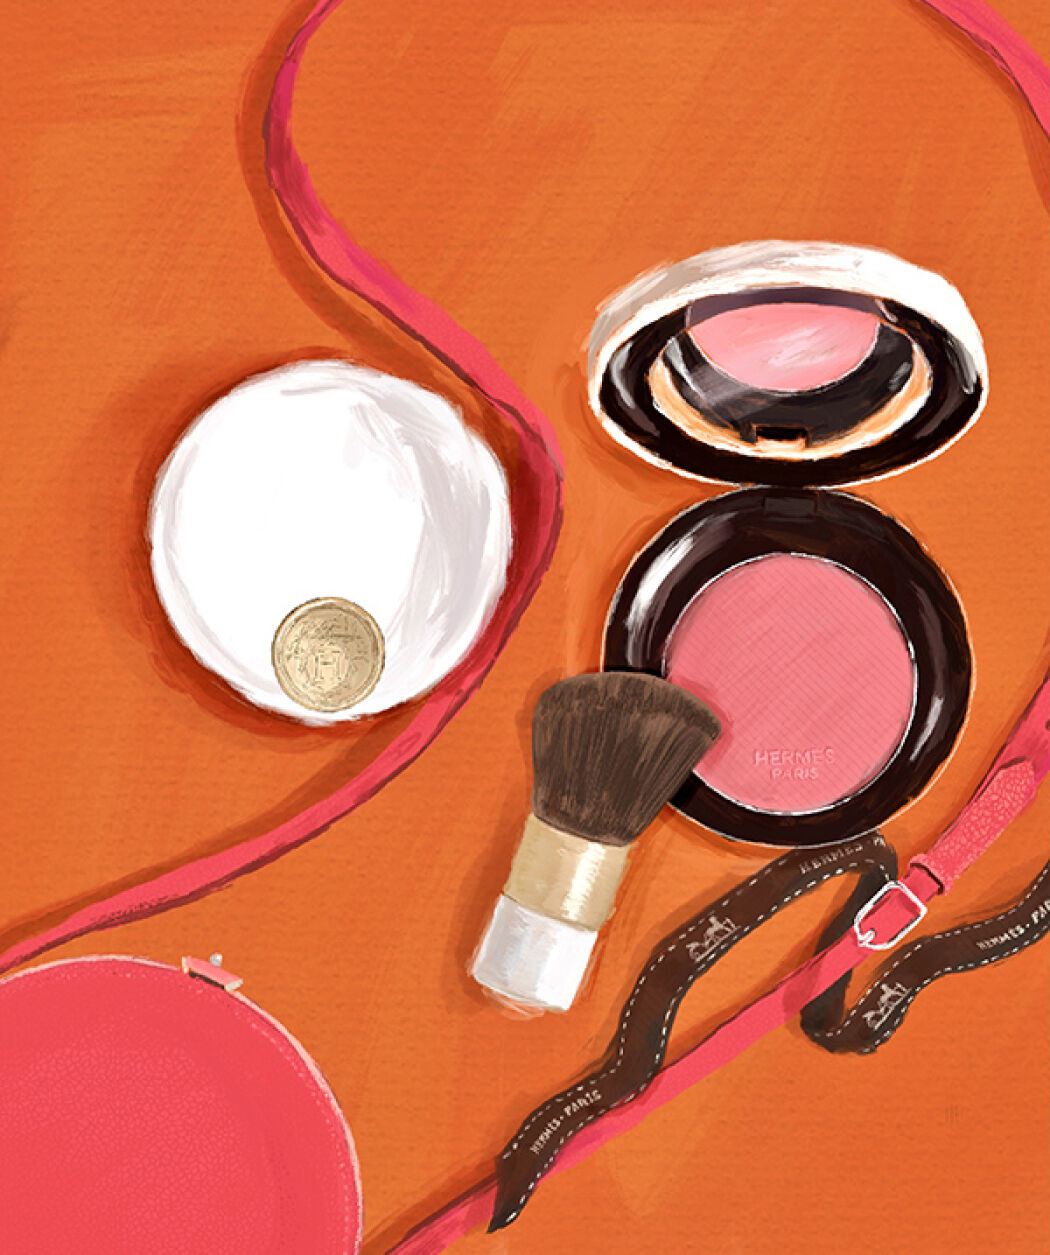 Beauty and skincare illustration by Christina Gliha for Hermès